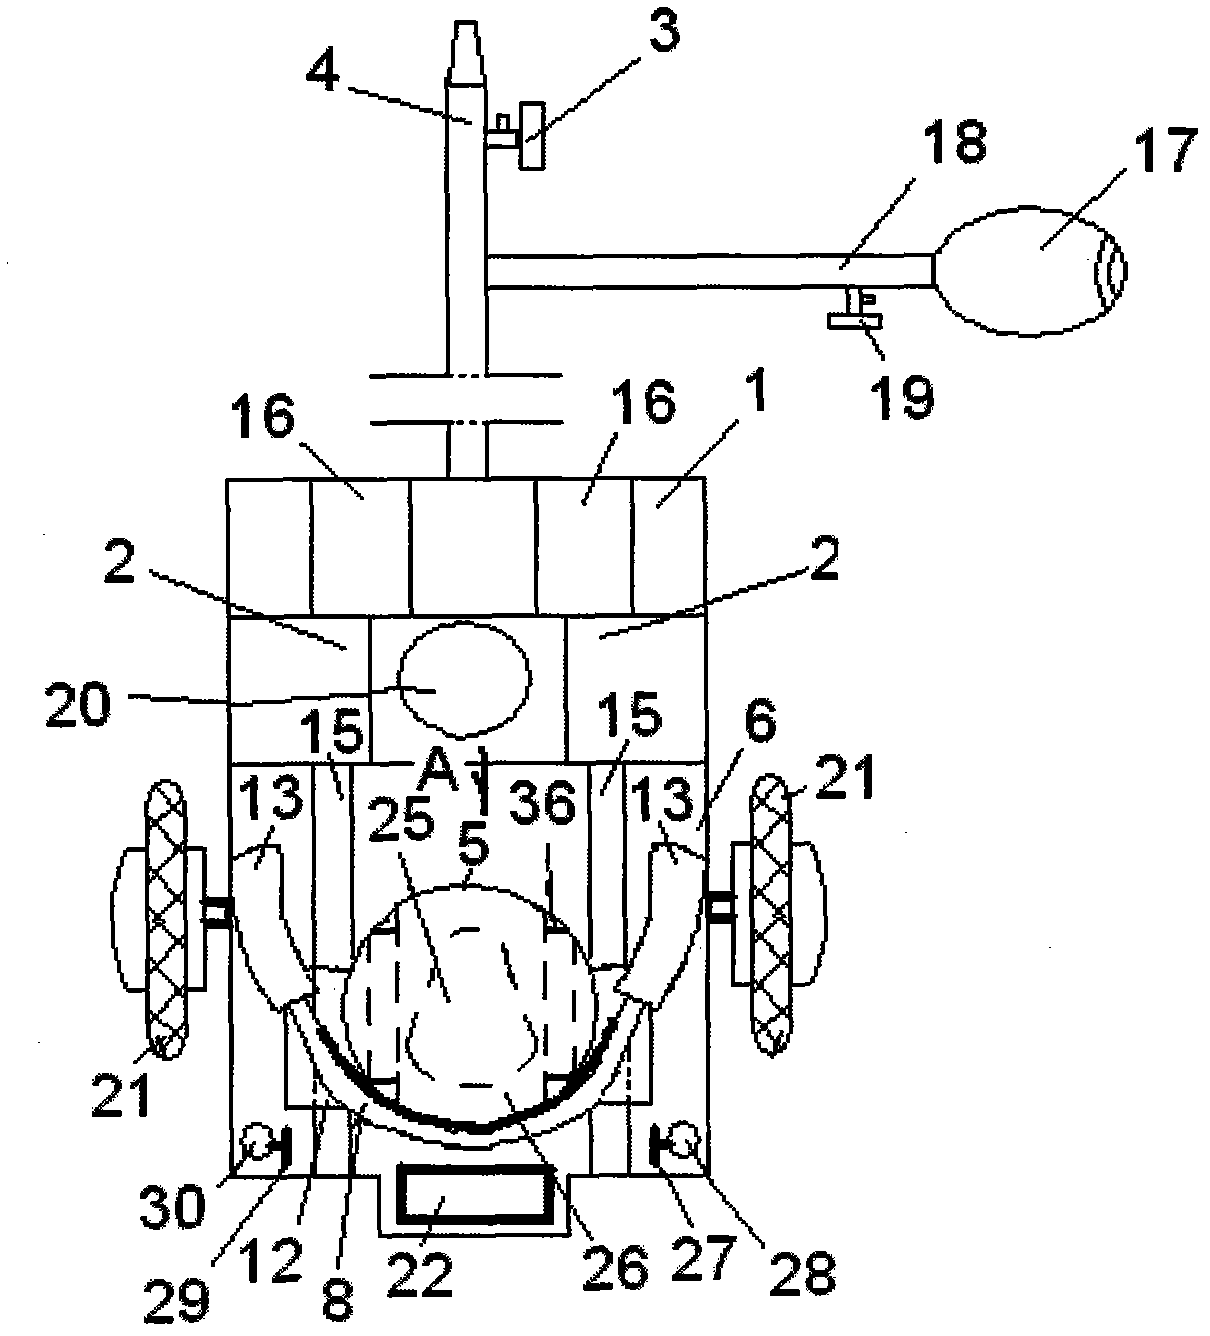 Electric multi-functional pregnant woman transporting cart device having enclosure and facilitating relieving the bowels